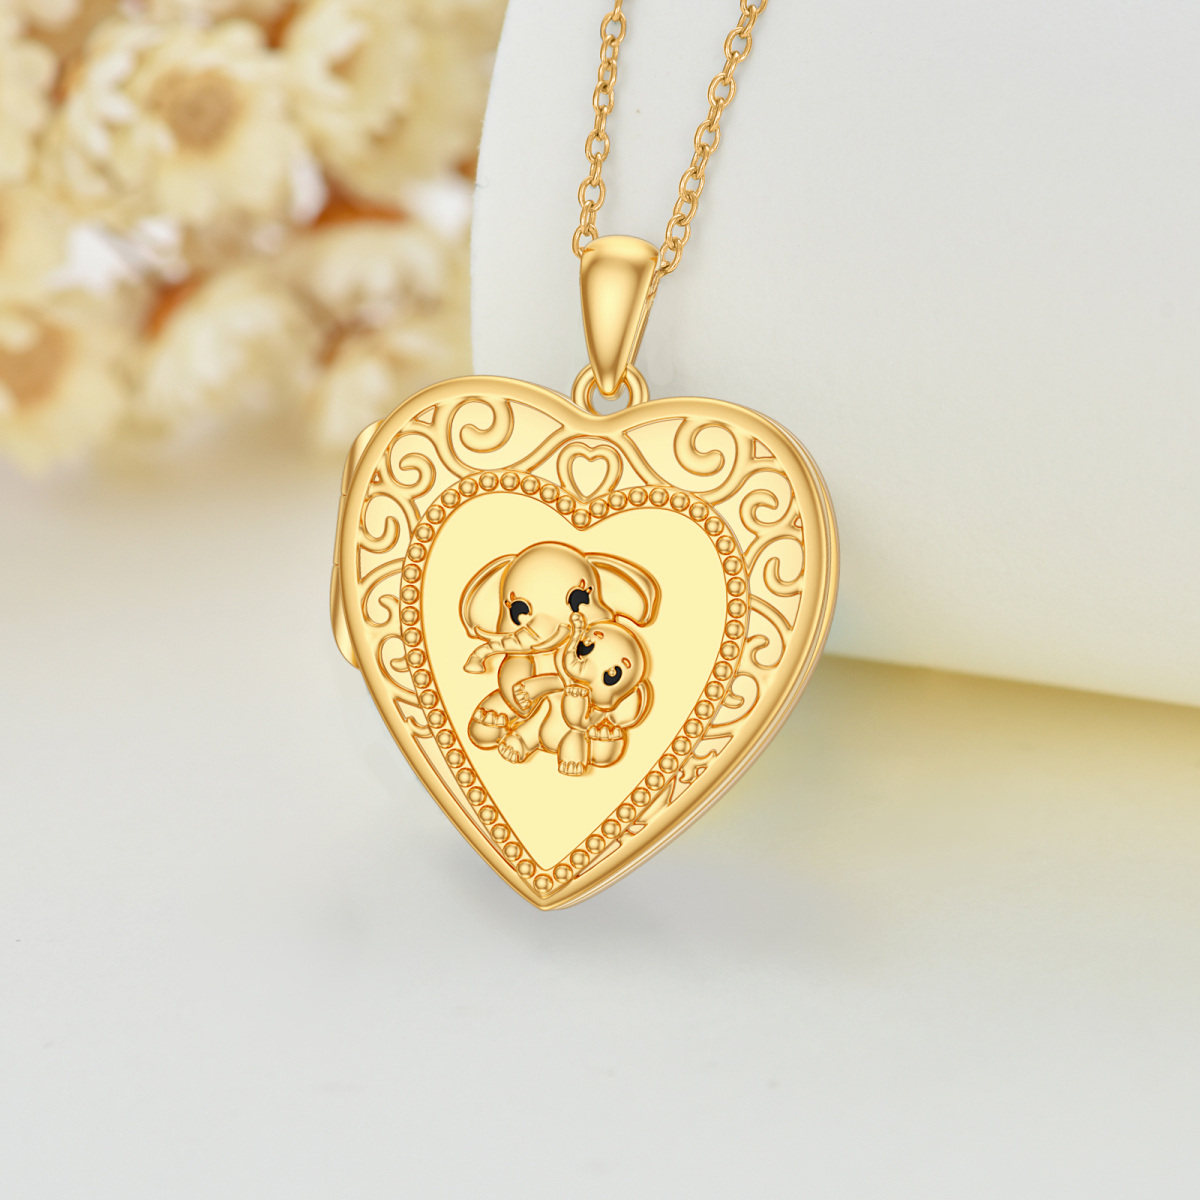 10K Gold Personalized Photo & Heart Personalized Photo Locket Necklace-5